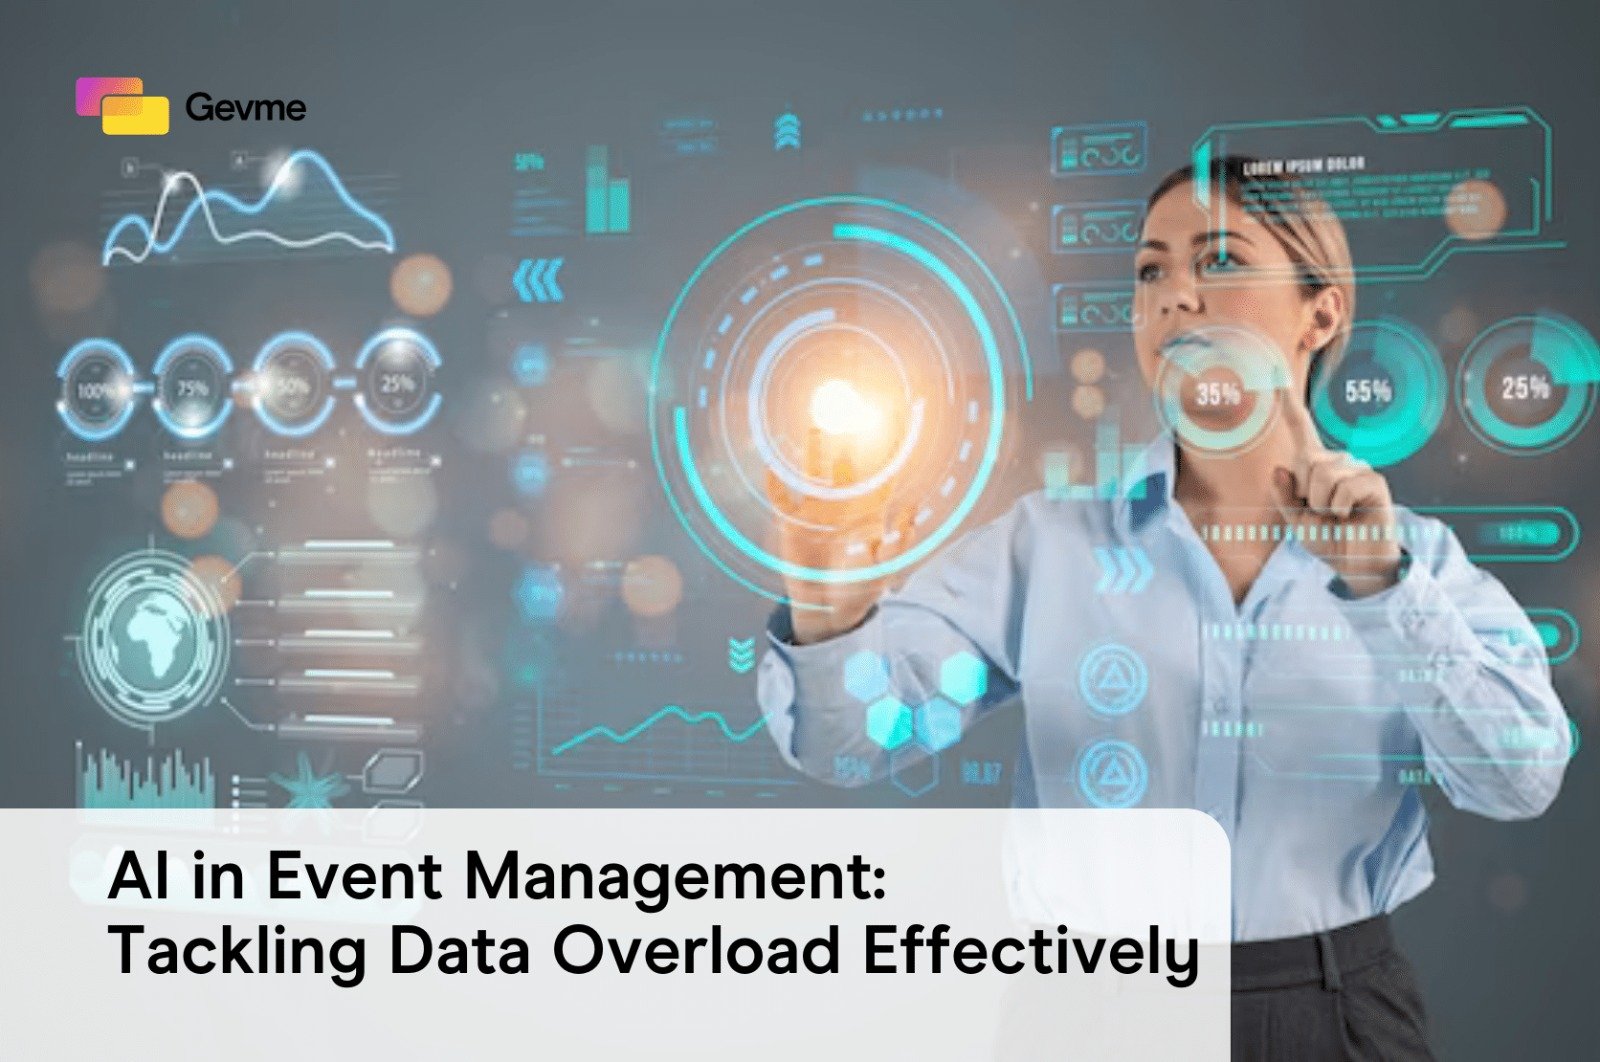 AI in Event Management: Tackling Data Overload Effectively